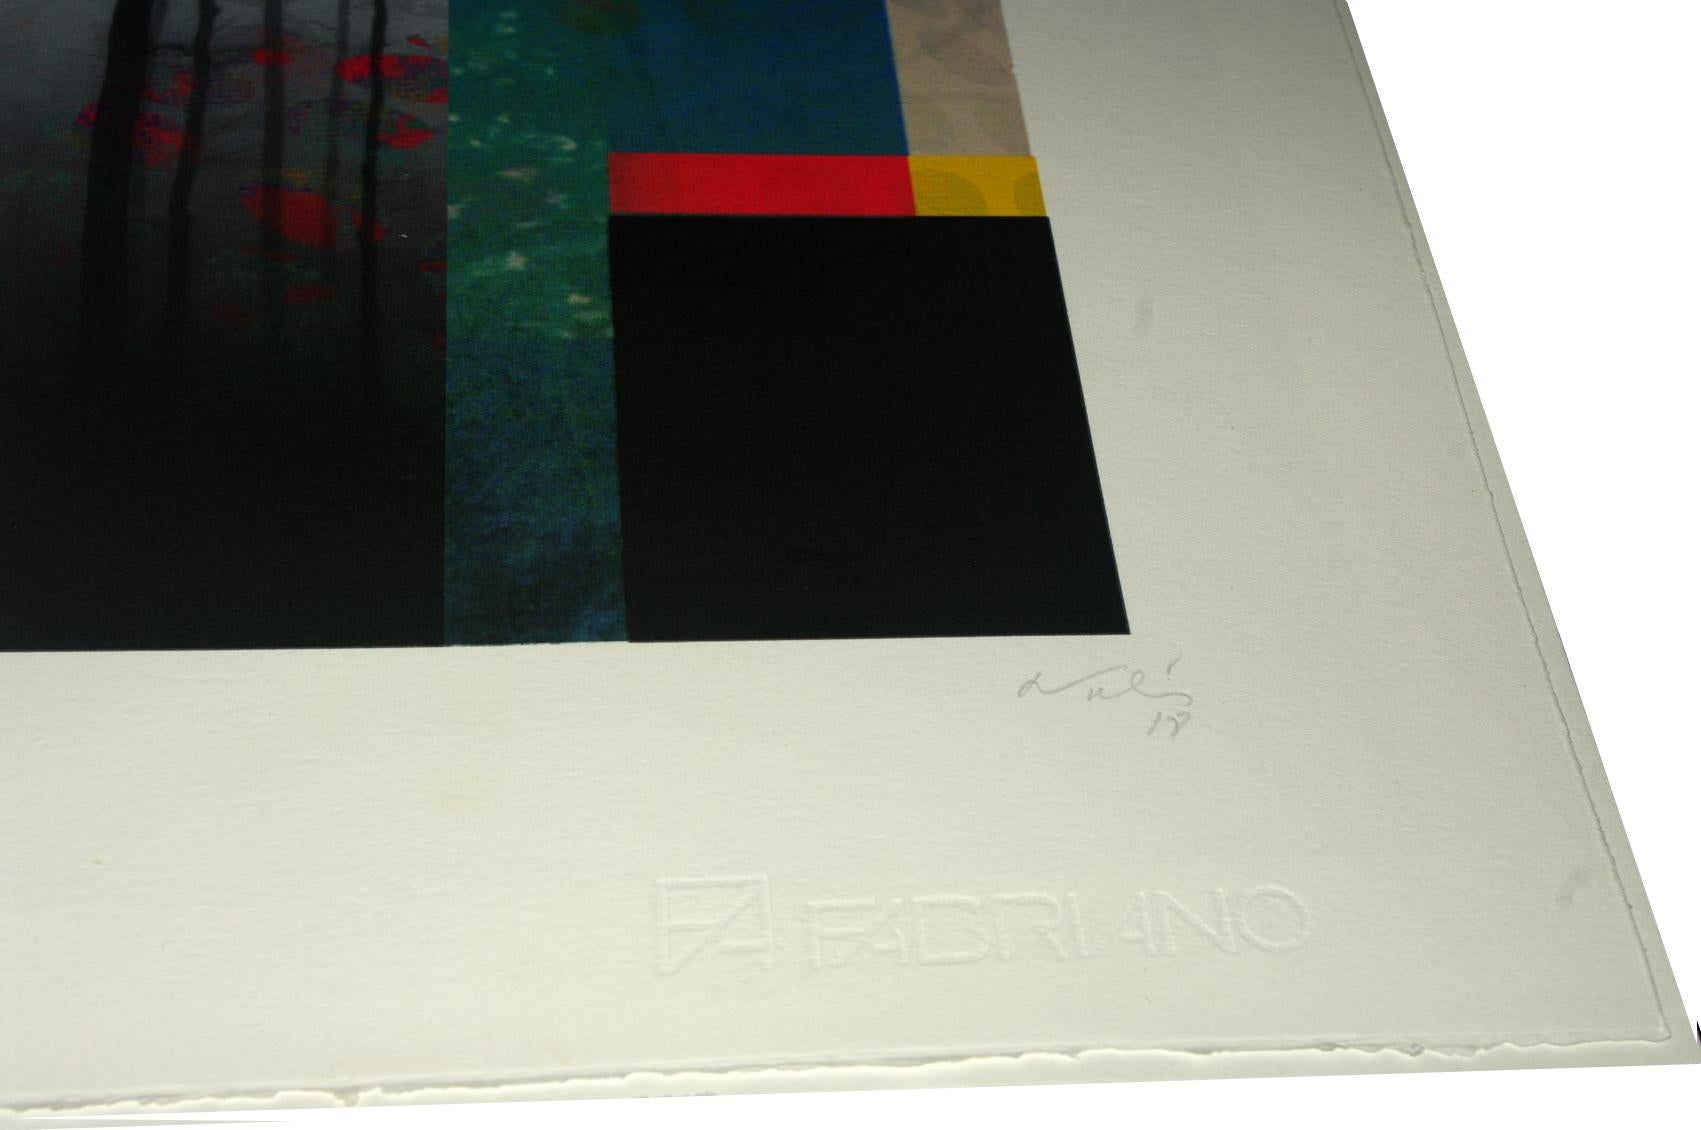 One bird at the forest

Digital pigment print Ultrachrome ink on Fabriano Rosaspina paper. Hand signed by the artist, and certificate of authenticity. Edition of 25  (Unframed)

His work has been shown in Reina Sofía Museum of Madrid, Royal Academy